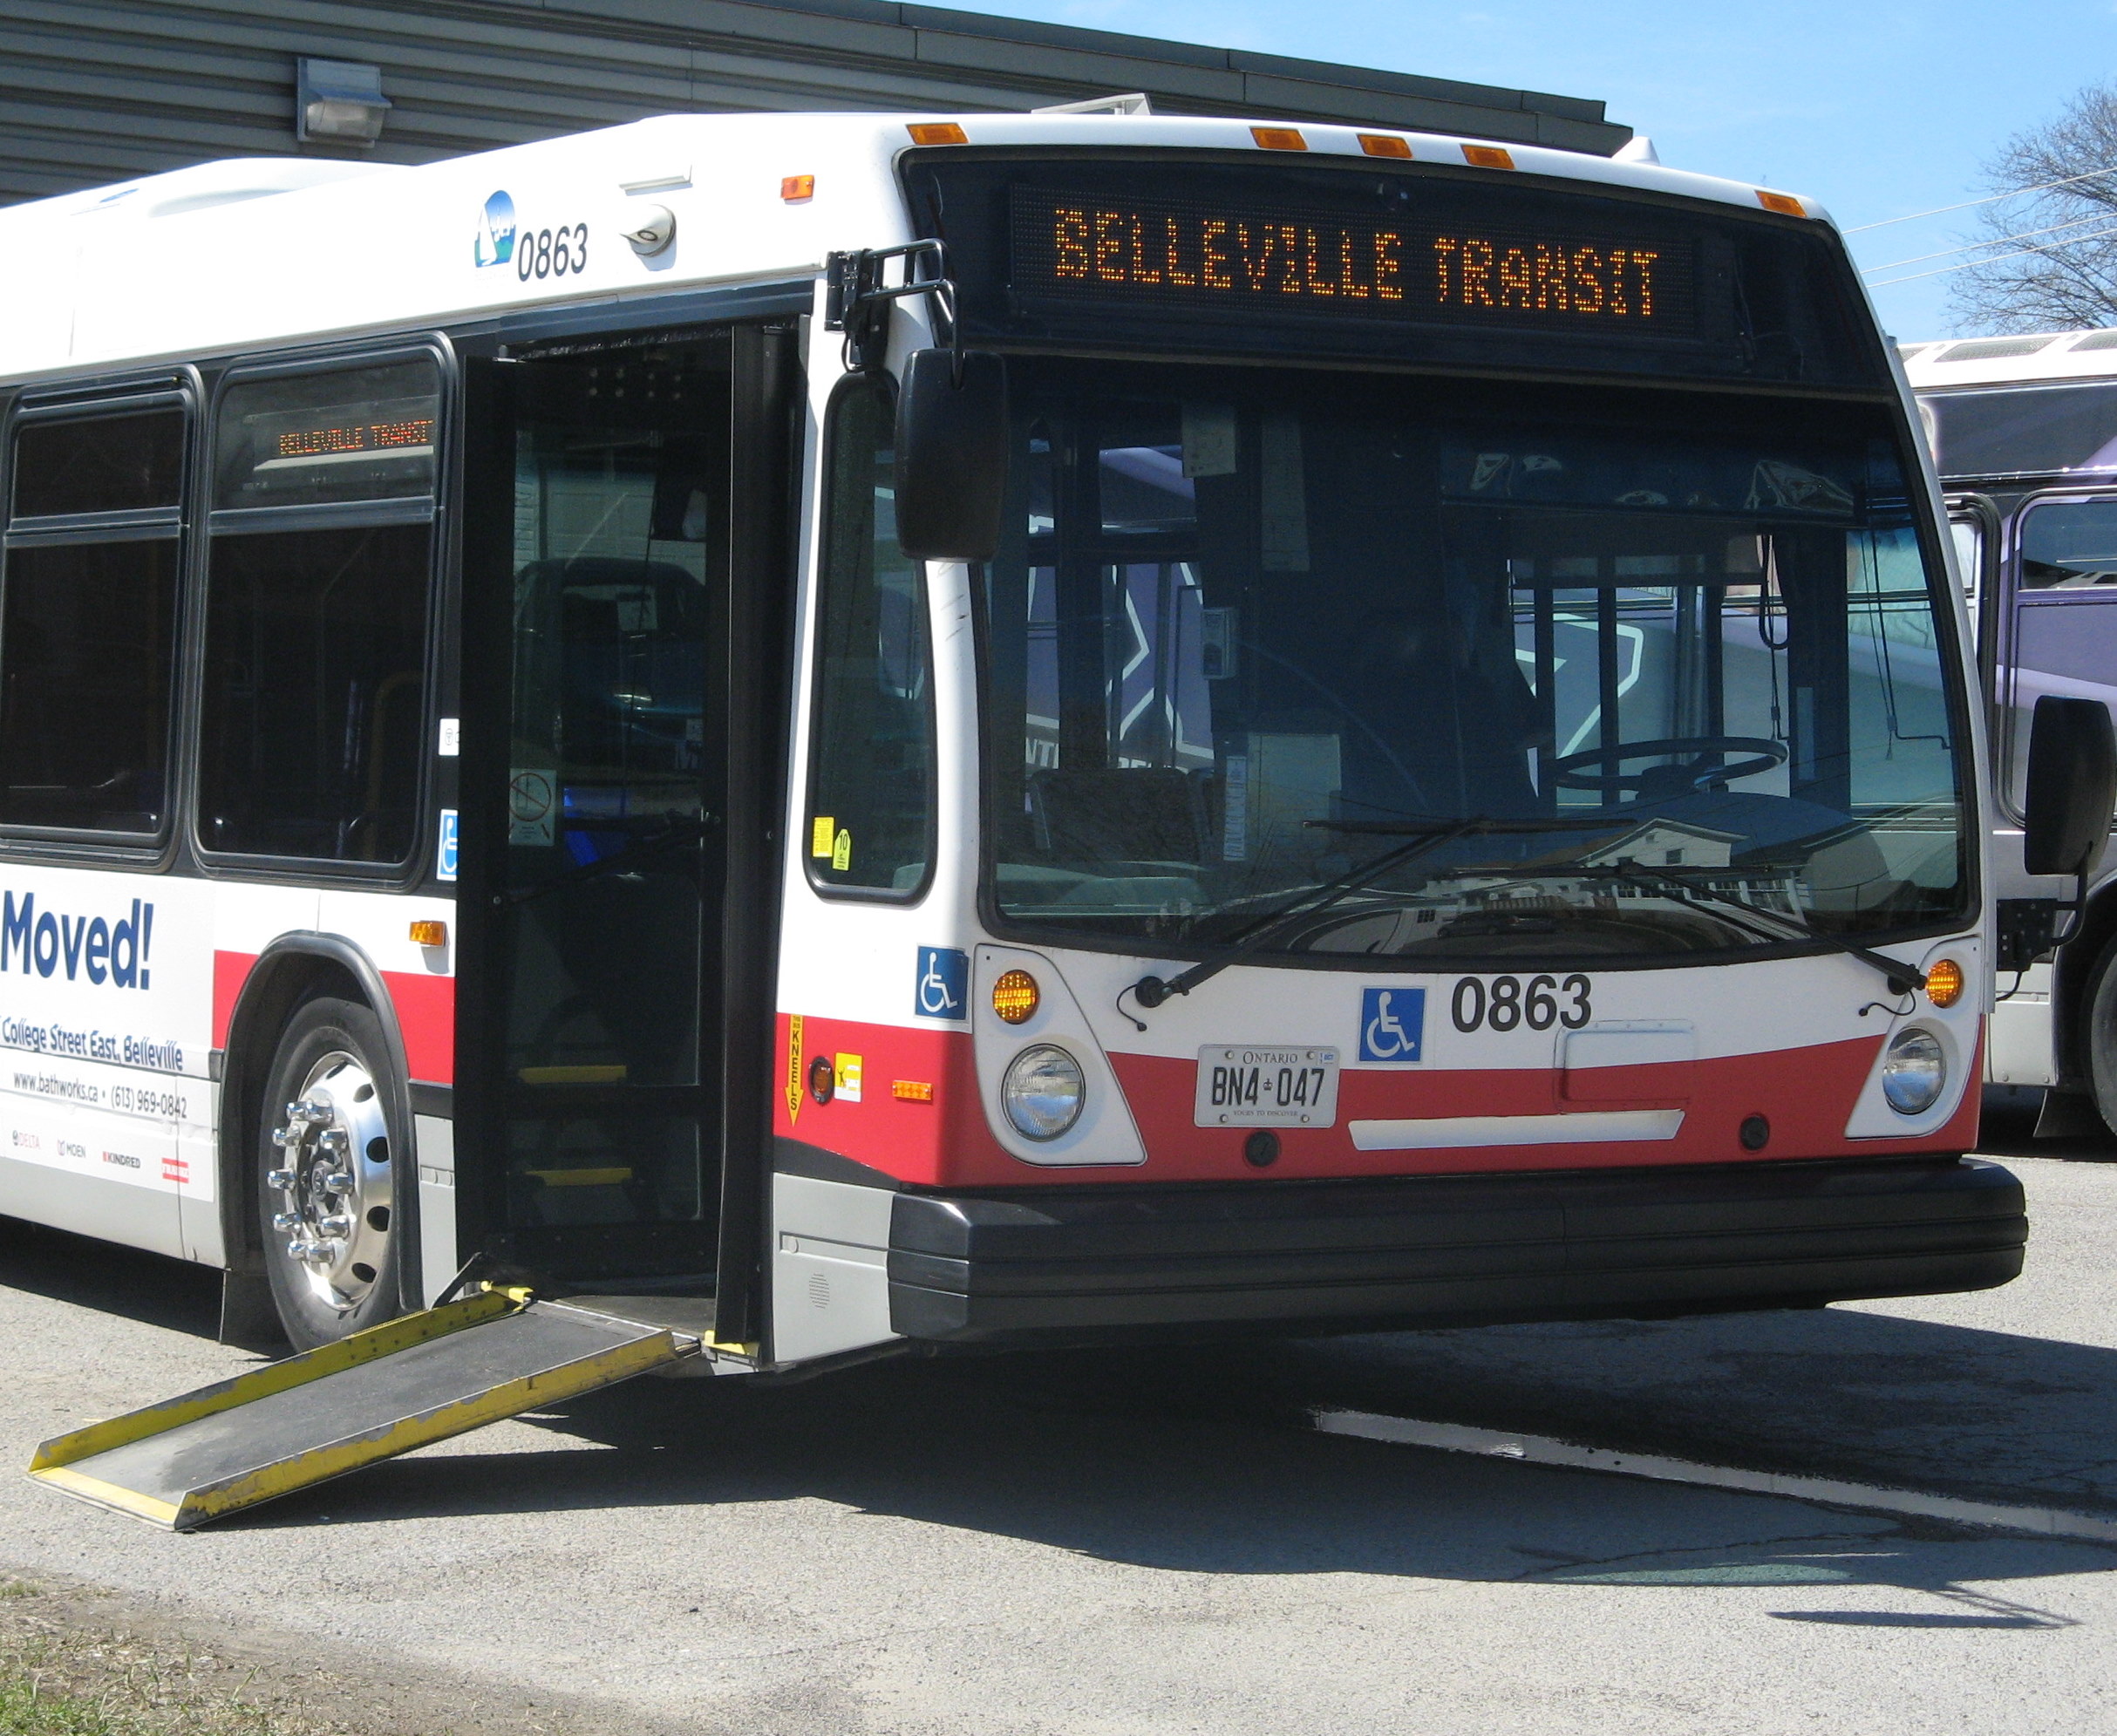 a conventional transit bus from Belleville Transit lowers the front entrance and deploys the ramp for easier boarding